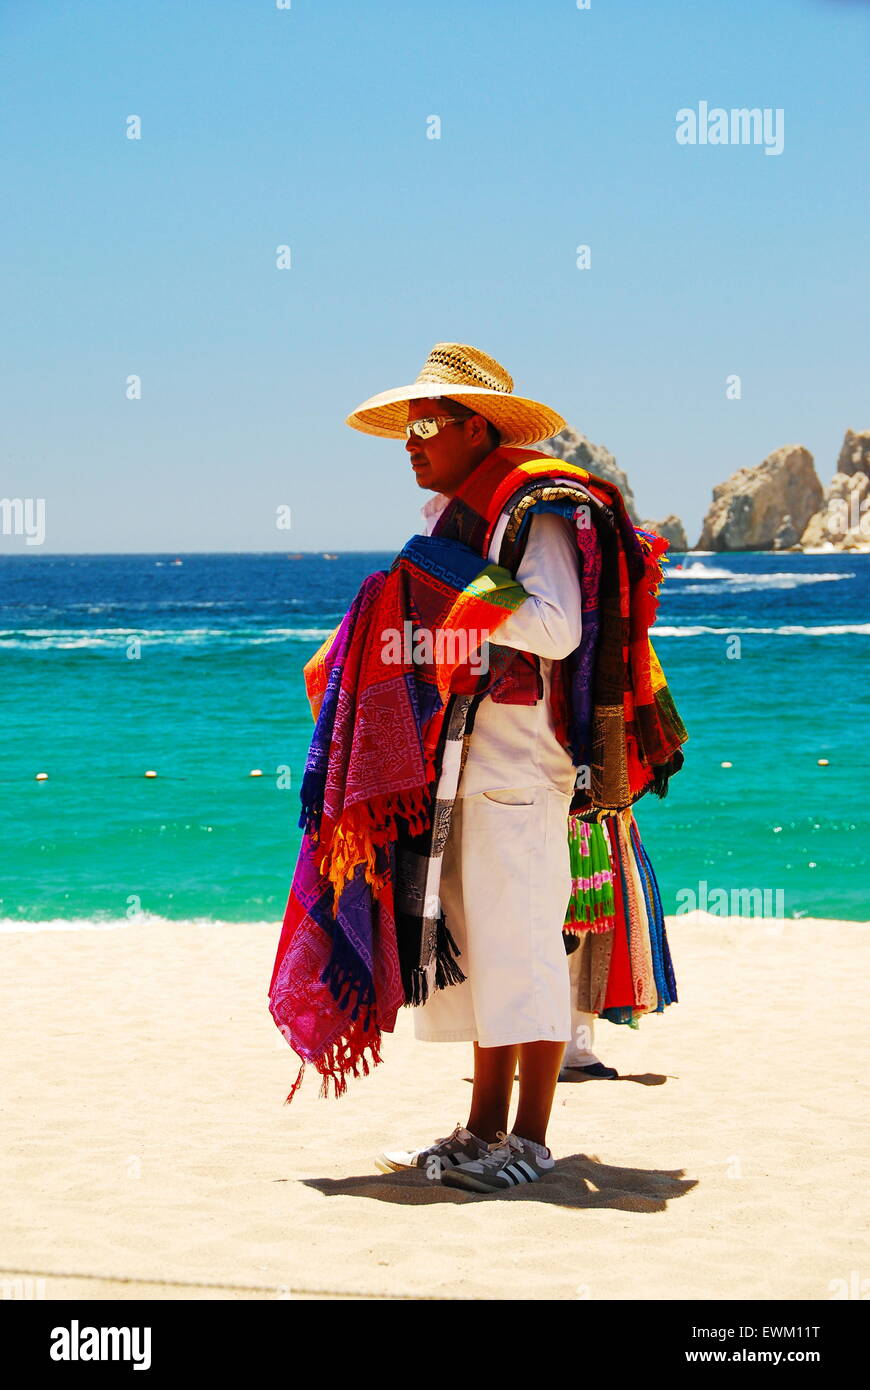 Local man selling colorful linens on the beach in Cabo San Lucas, Mexico Stock Photo